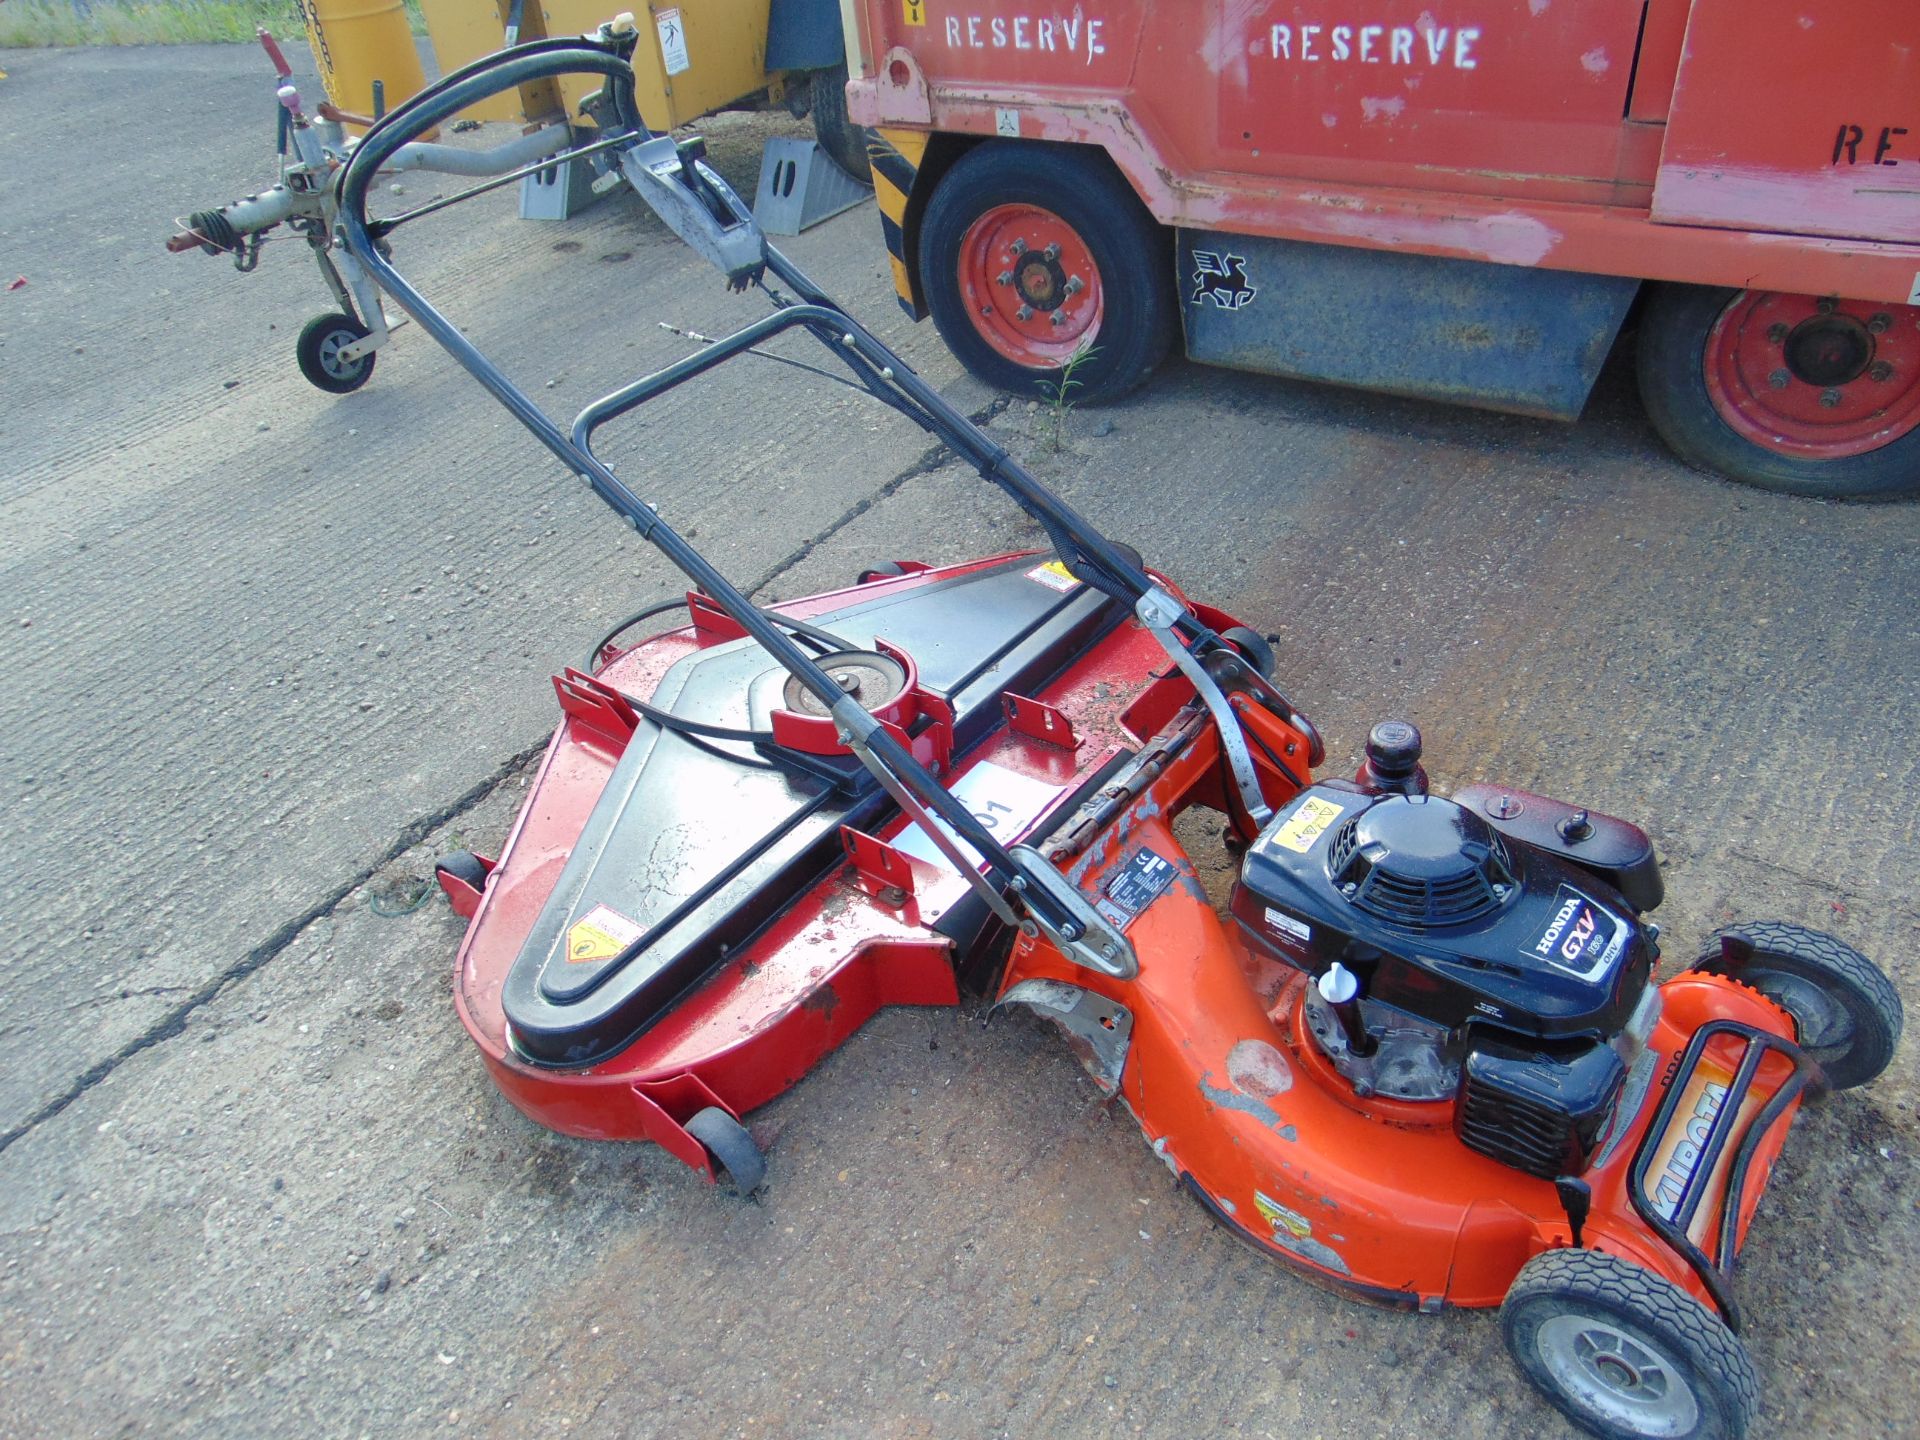 KUBOTA MOWER PLUS COUNTAX 48 INCHES MOWER DECK FROM COUNTY COUNCIL - Image 2 of 6